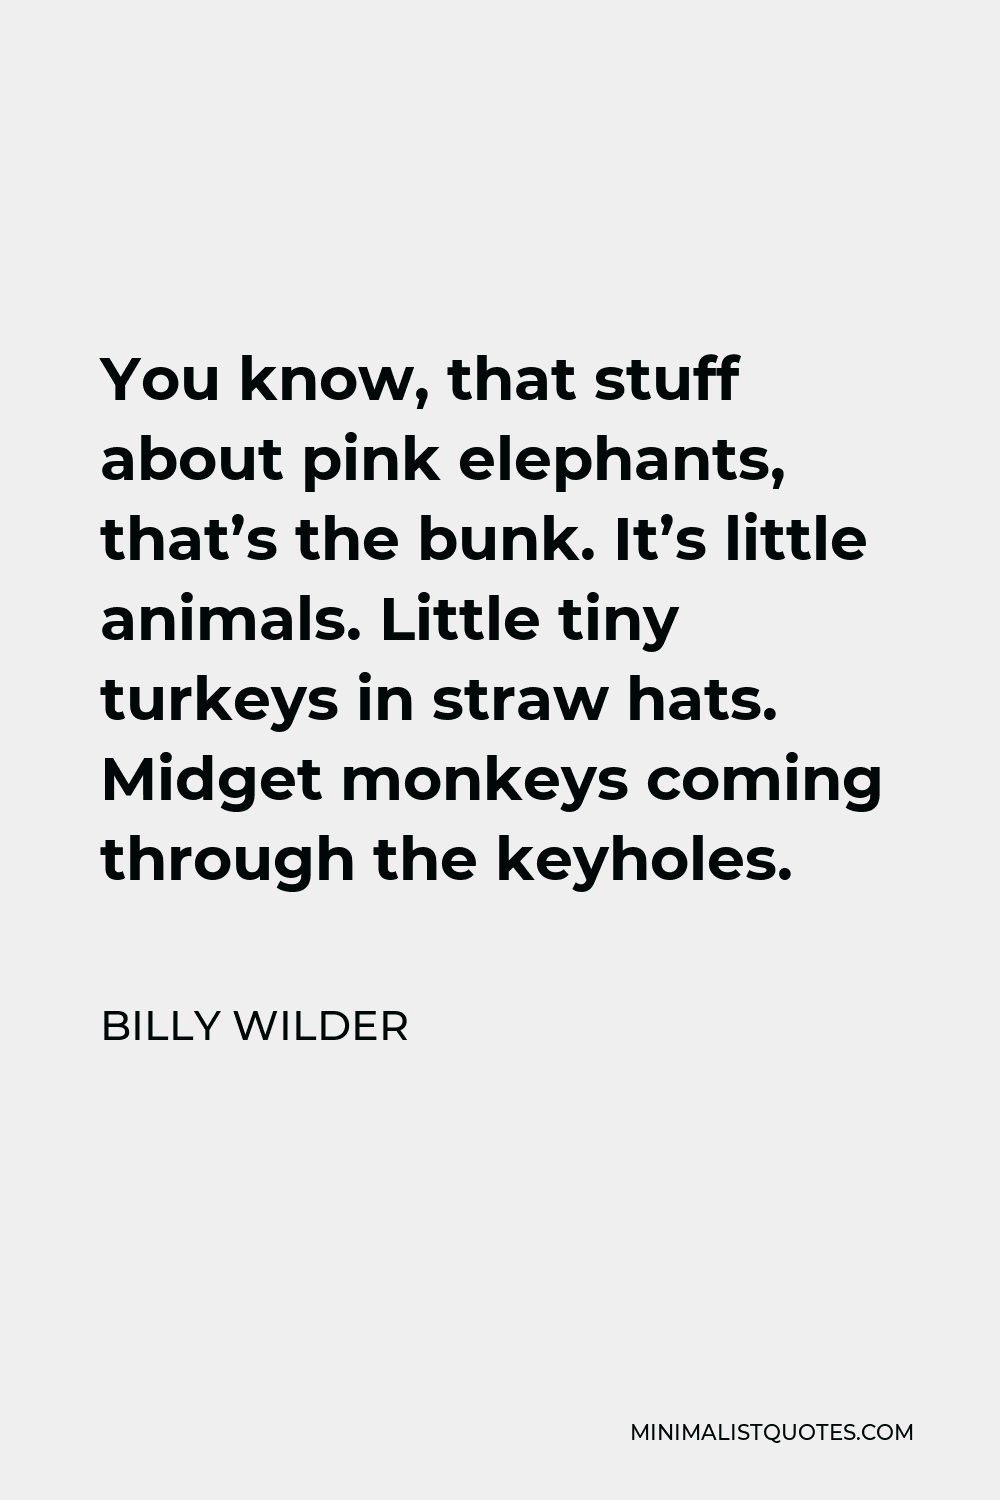 Billy Wilder Quote - You know, that stuff about pink elephants, that’s the bunk. It’s little animals. Little tiny turkeys in straw hats. Midget monkeys coming through the keyholes.